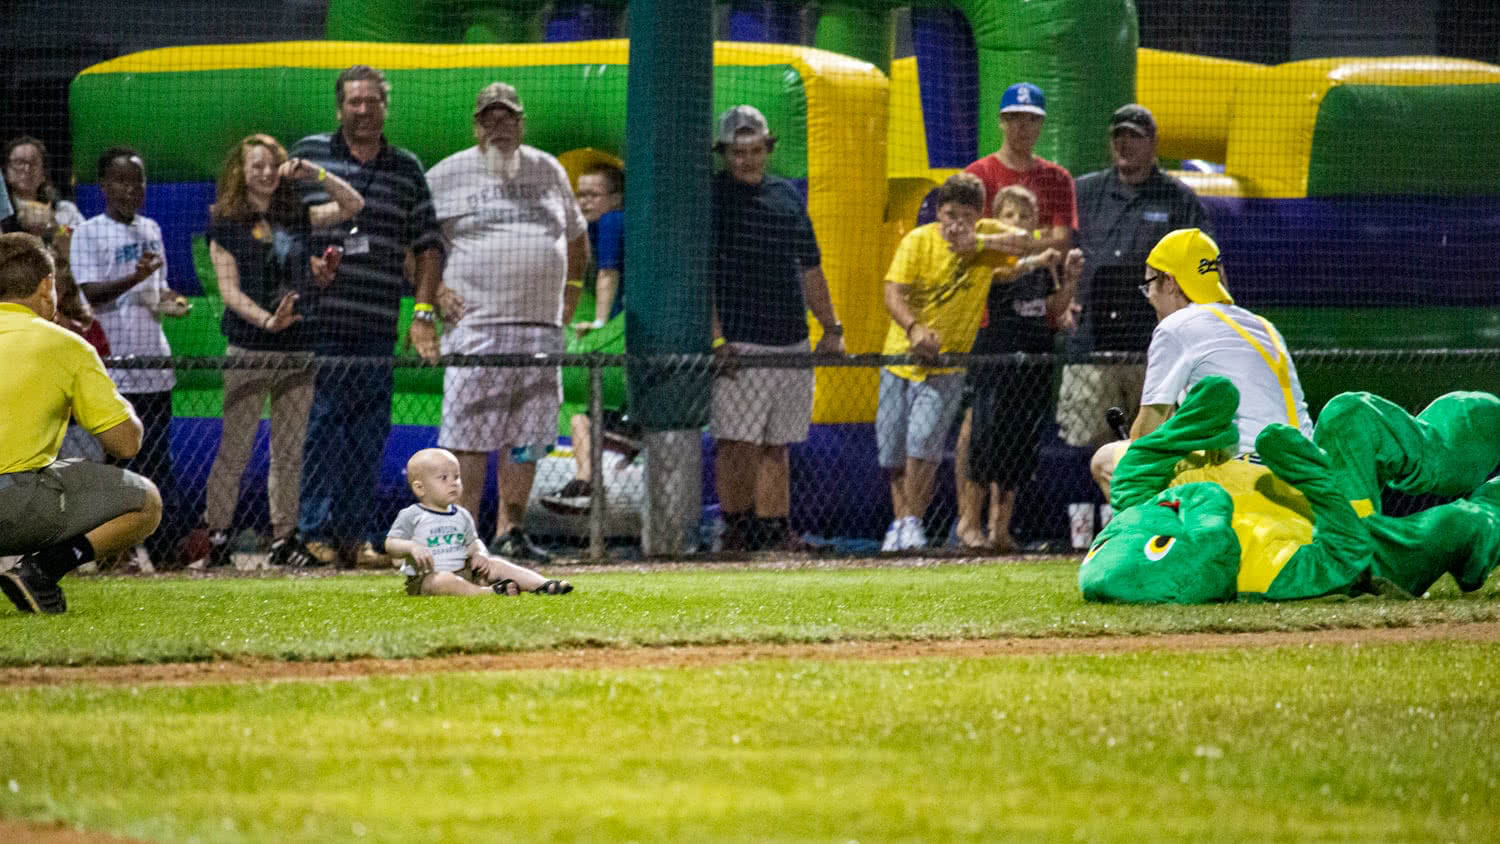 Toddler v Turtle Race... or Rest? Between Innings Entertainment at a Savannah Bananas Game